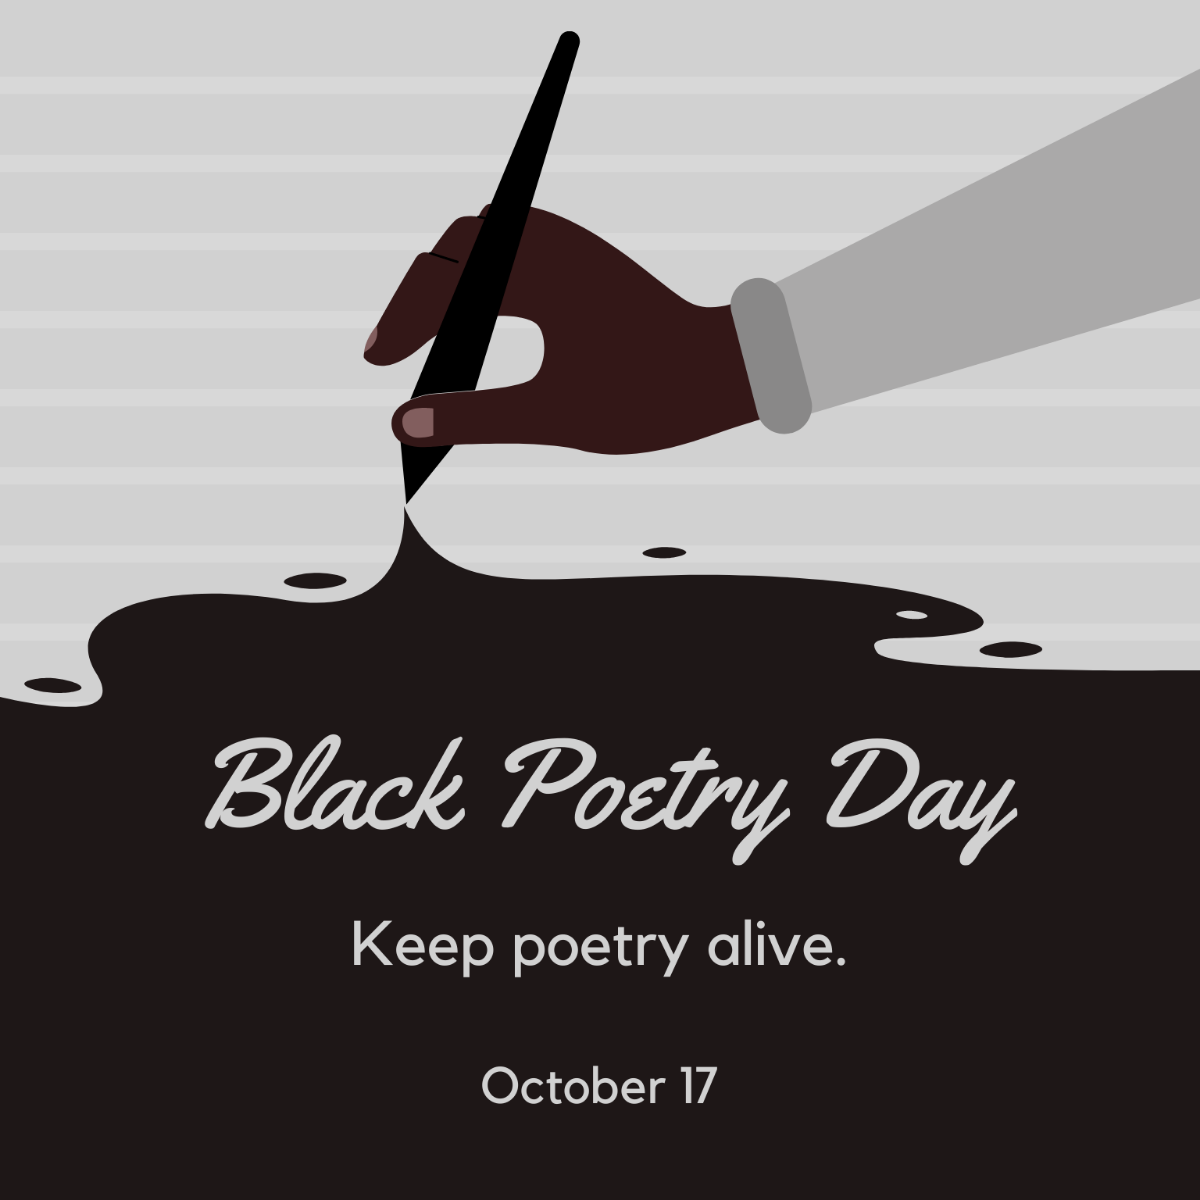 Free Black Poetry Day Poster Vector Template